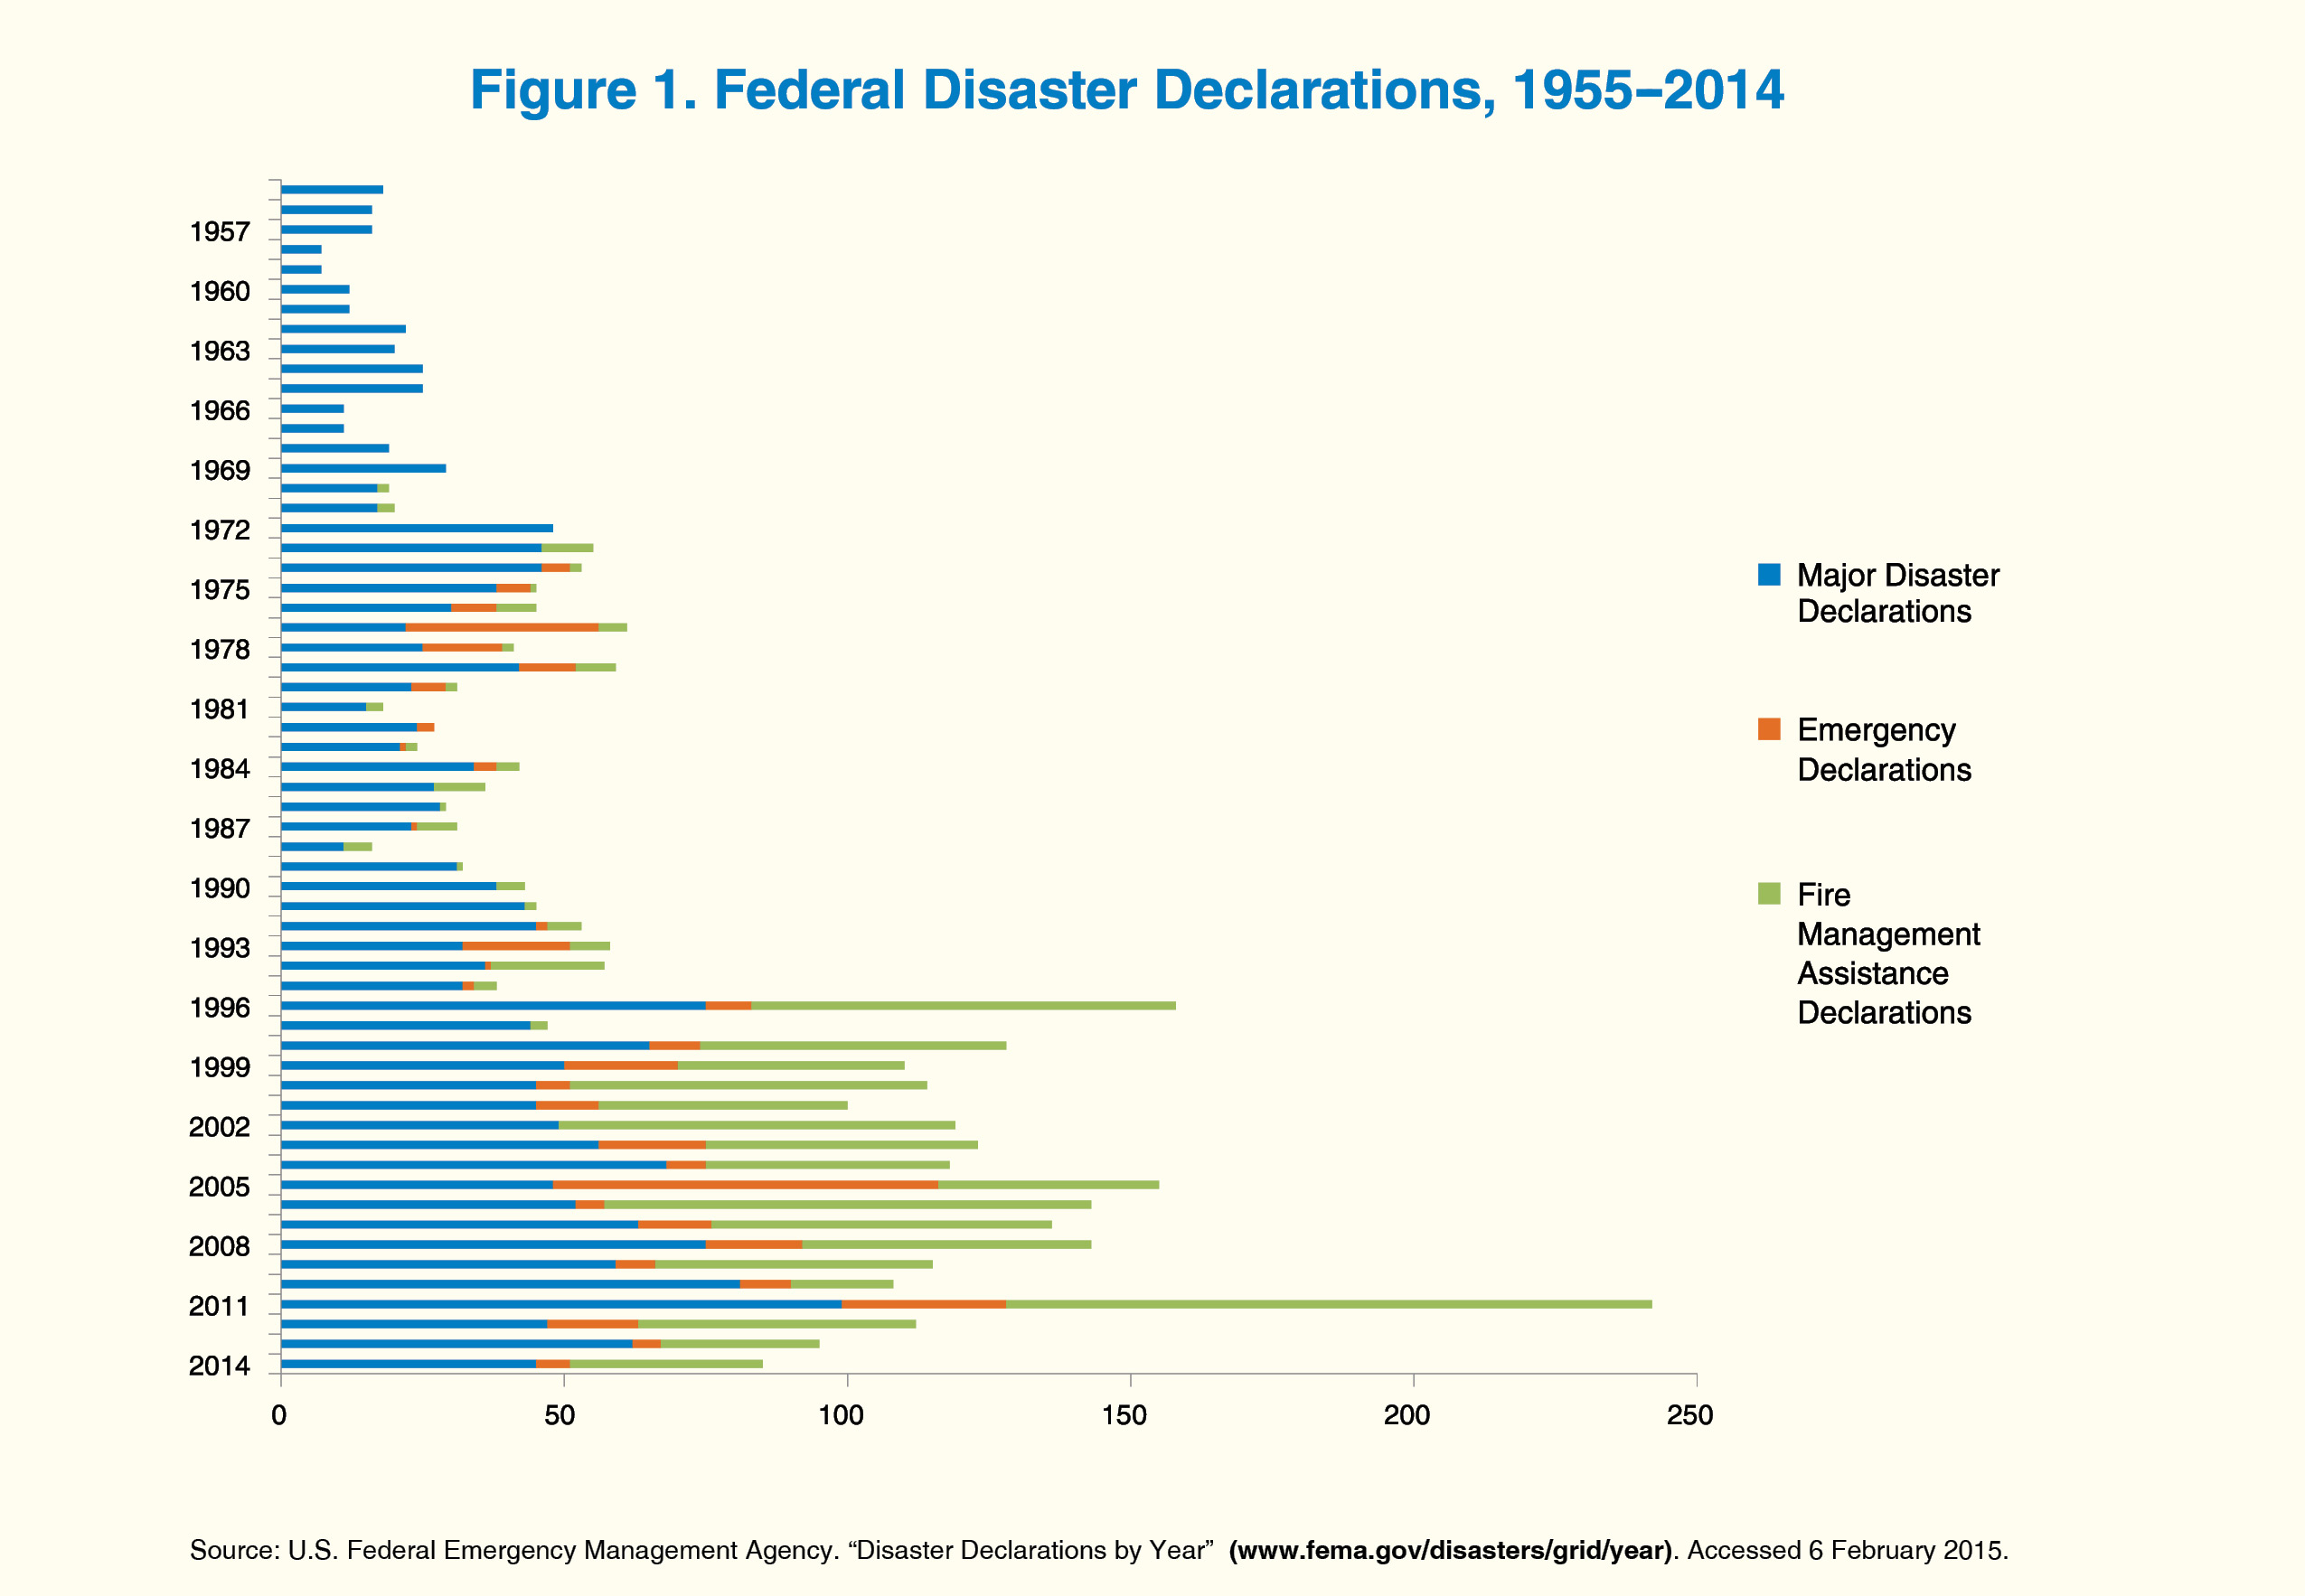 A bar chart showing number of federal disaster declarations by type for every year from 1955 to 2014.